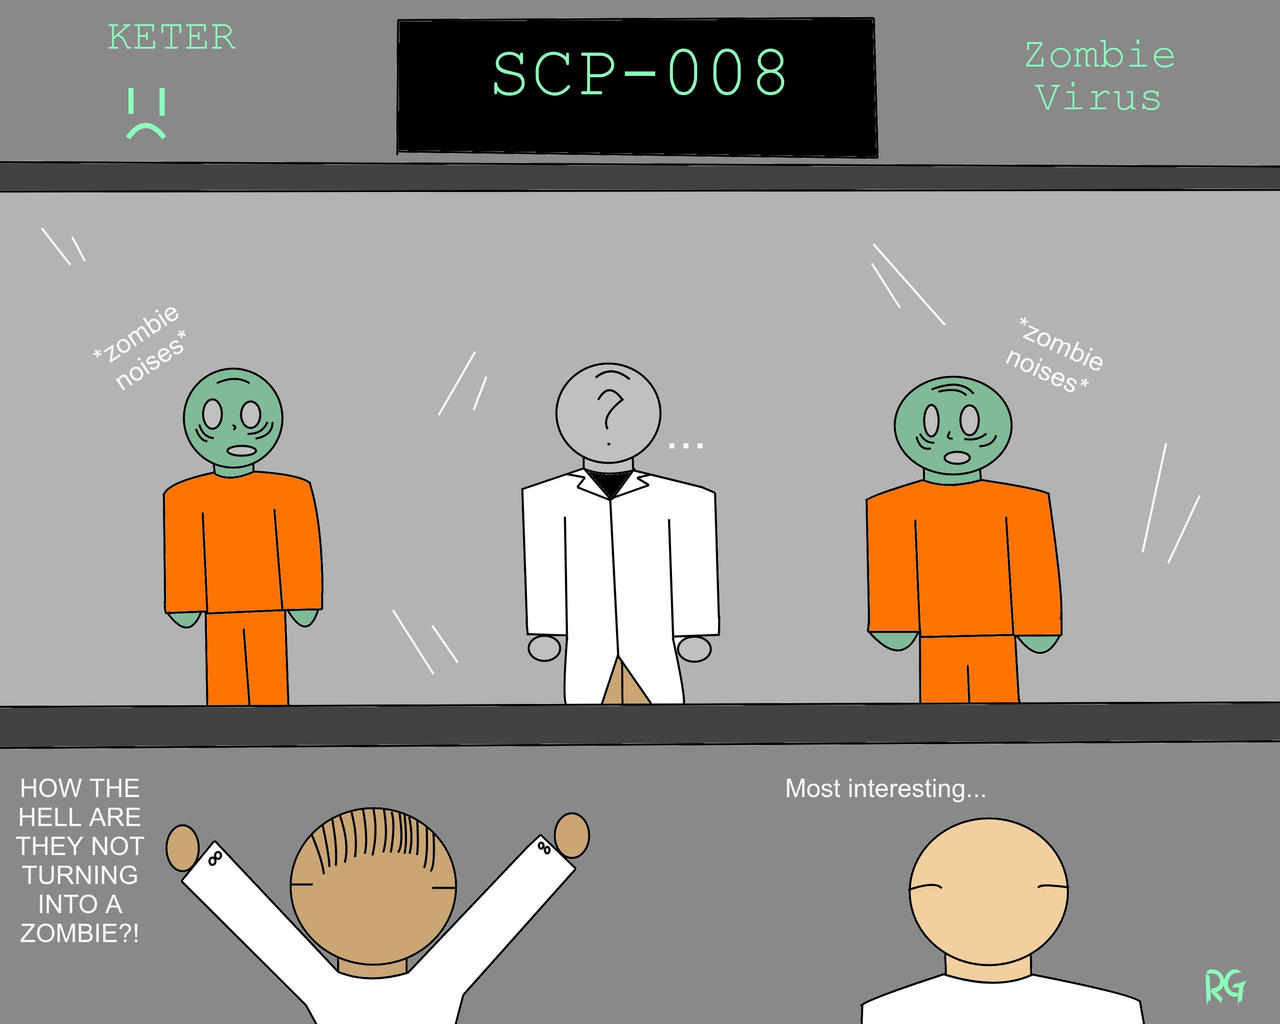 MINECRAFT- SCP 008 ZOMBIE OUTBREAK (IN OUR BASE OF SCP EXPERIMENTS